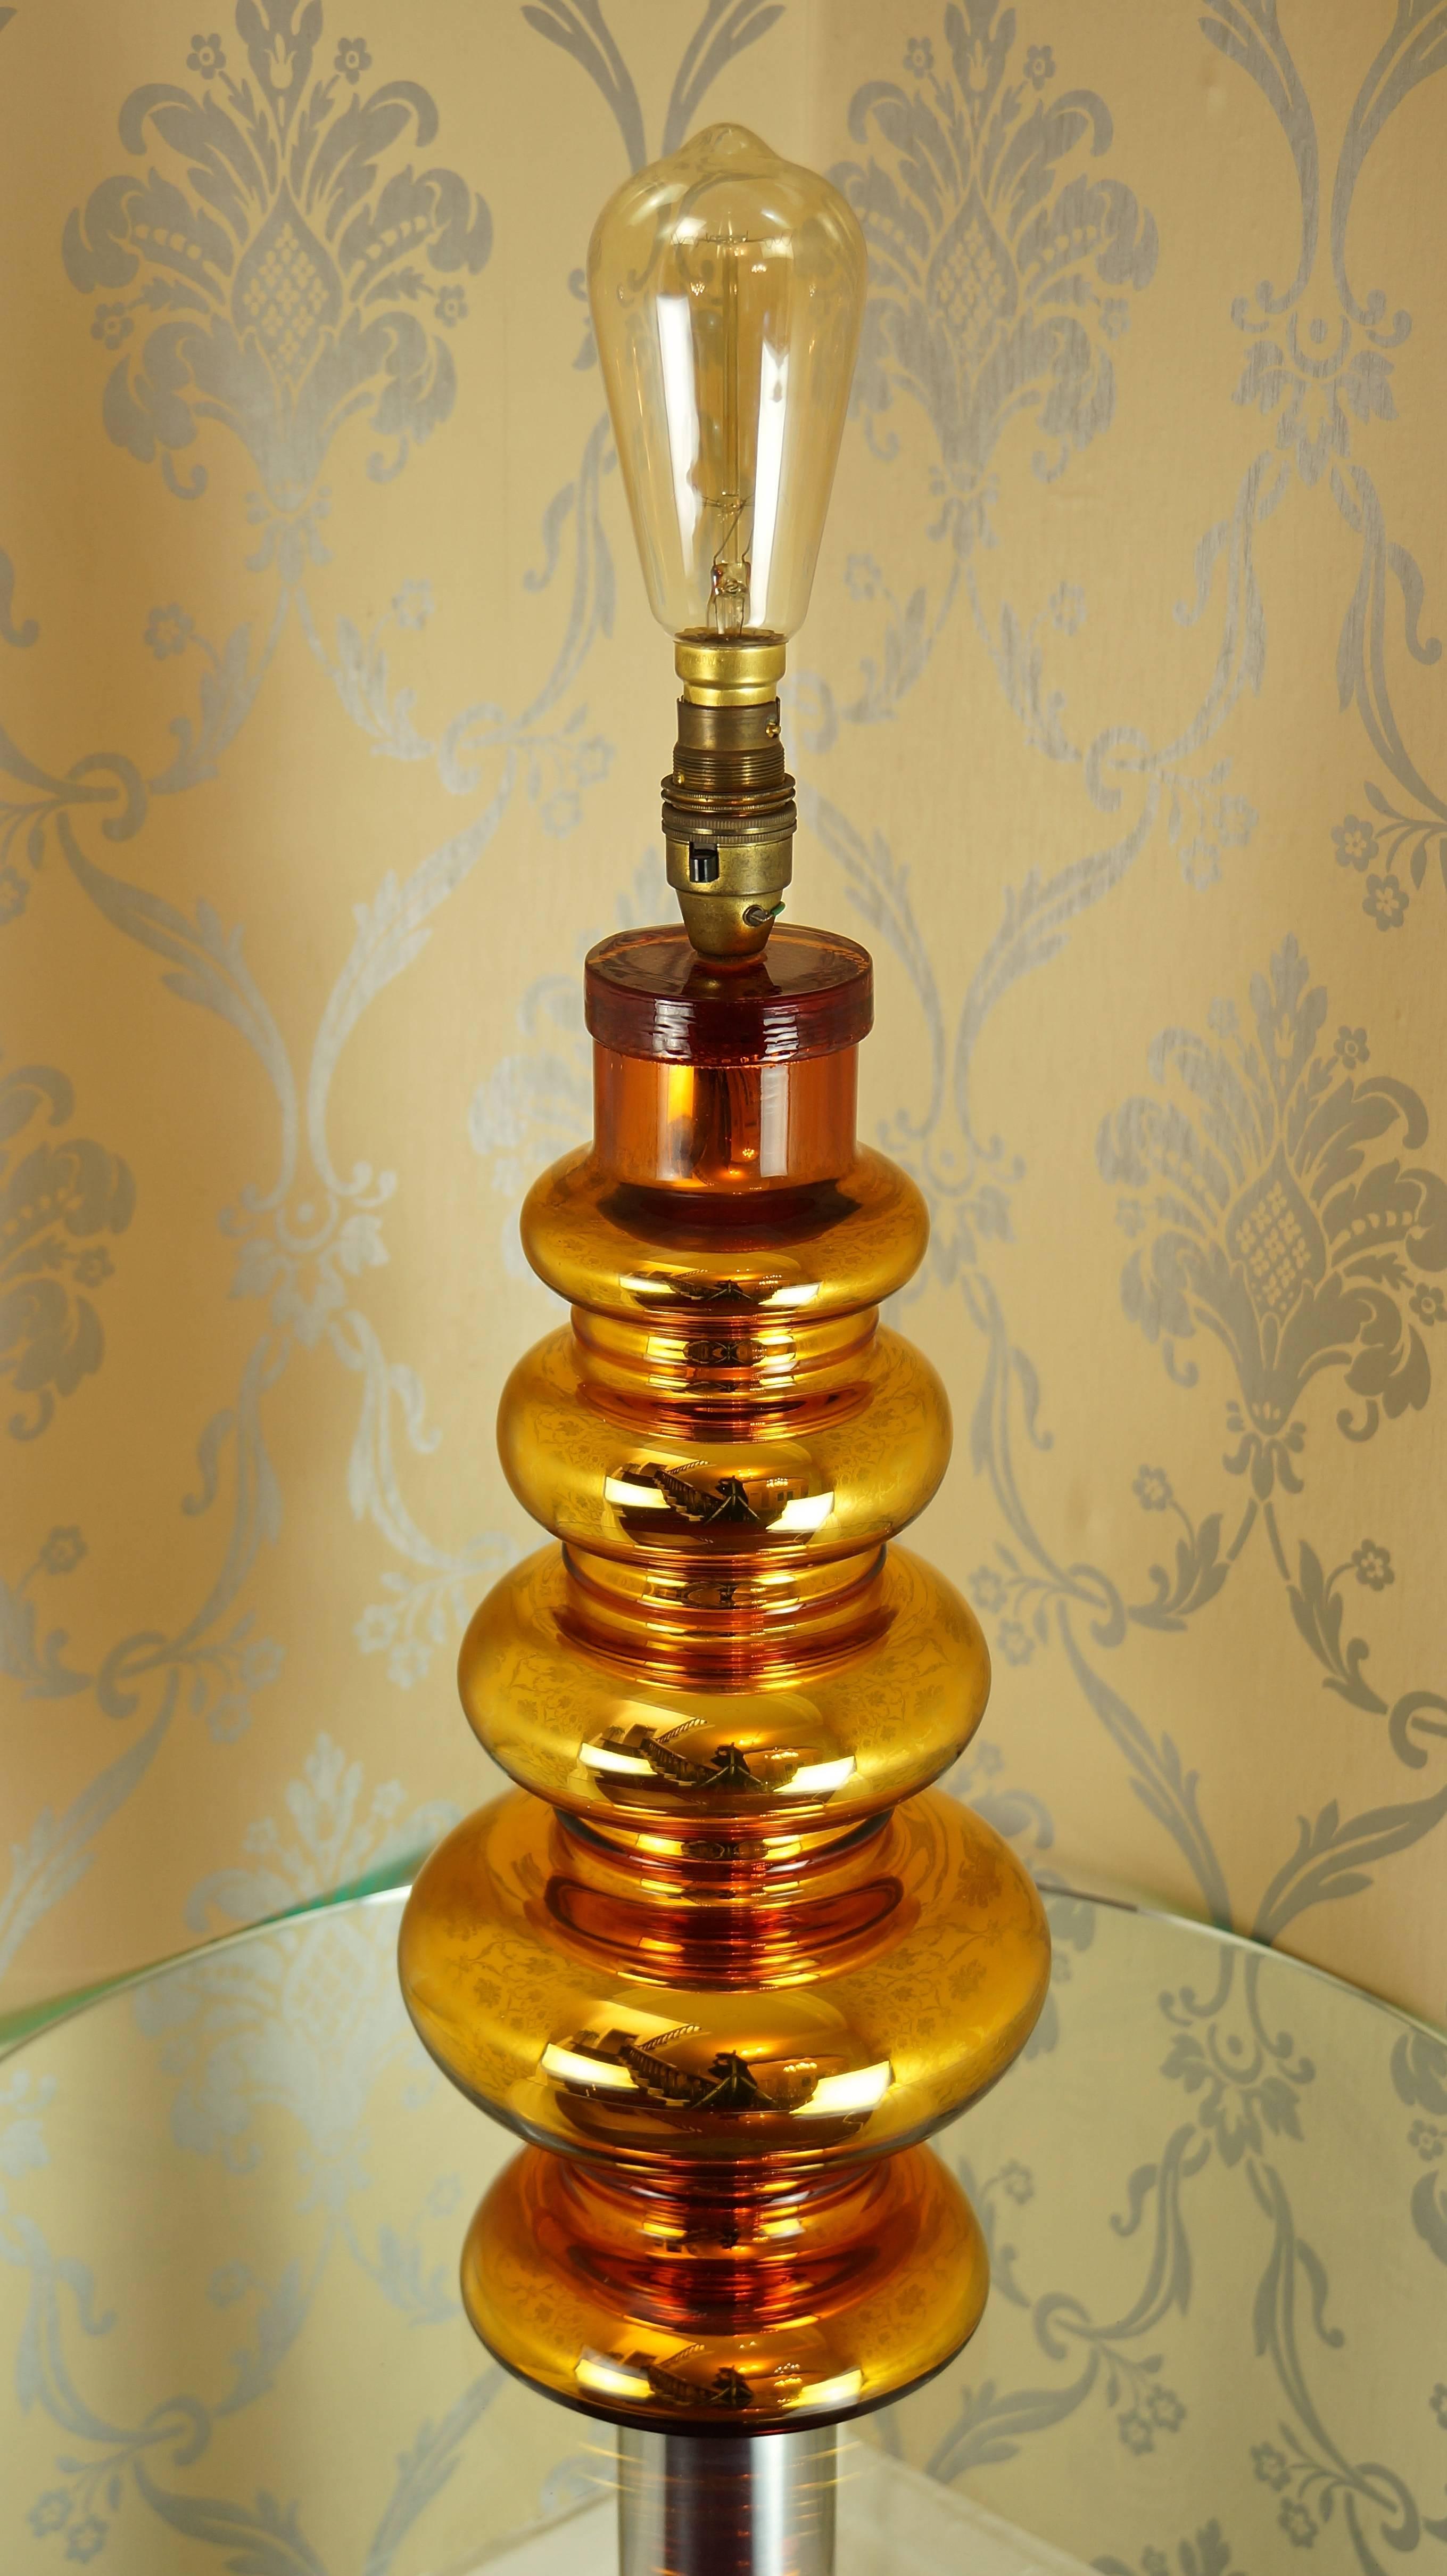 Johansfors Glasbruk Mercury Glass Gold Table Lamp, Vintage, Swedish, 1960s In Good Condition For Sale In Huddersfield, GB